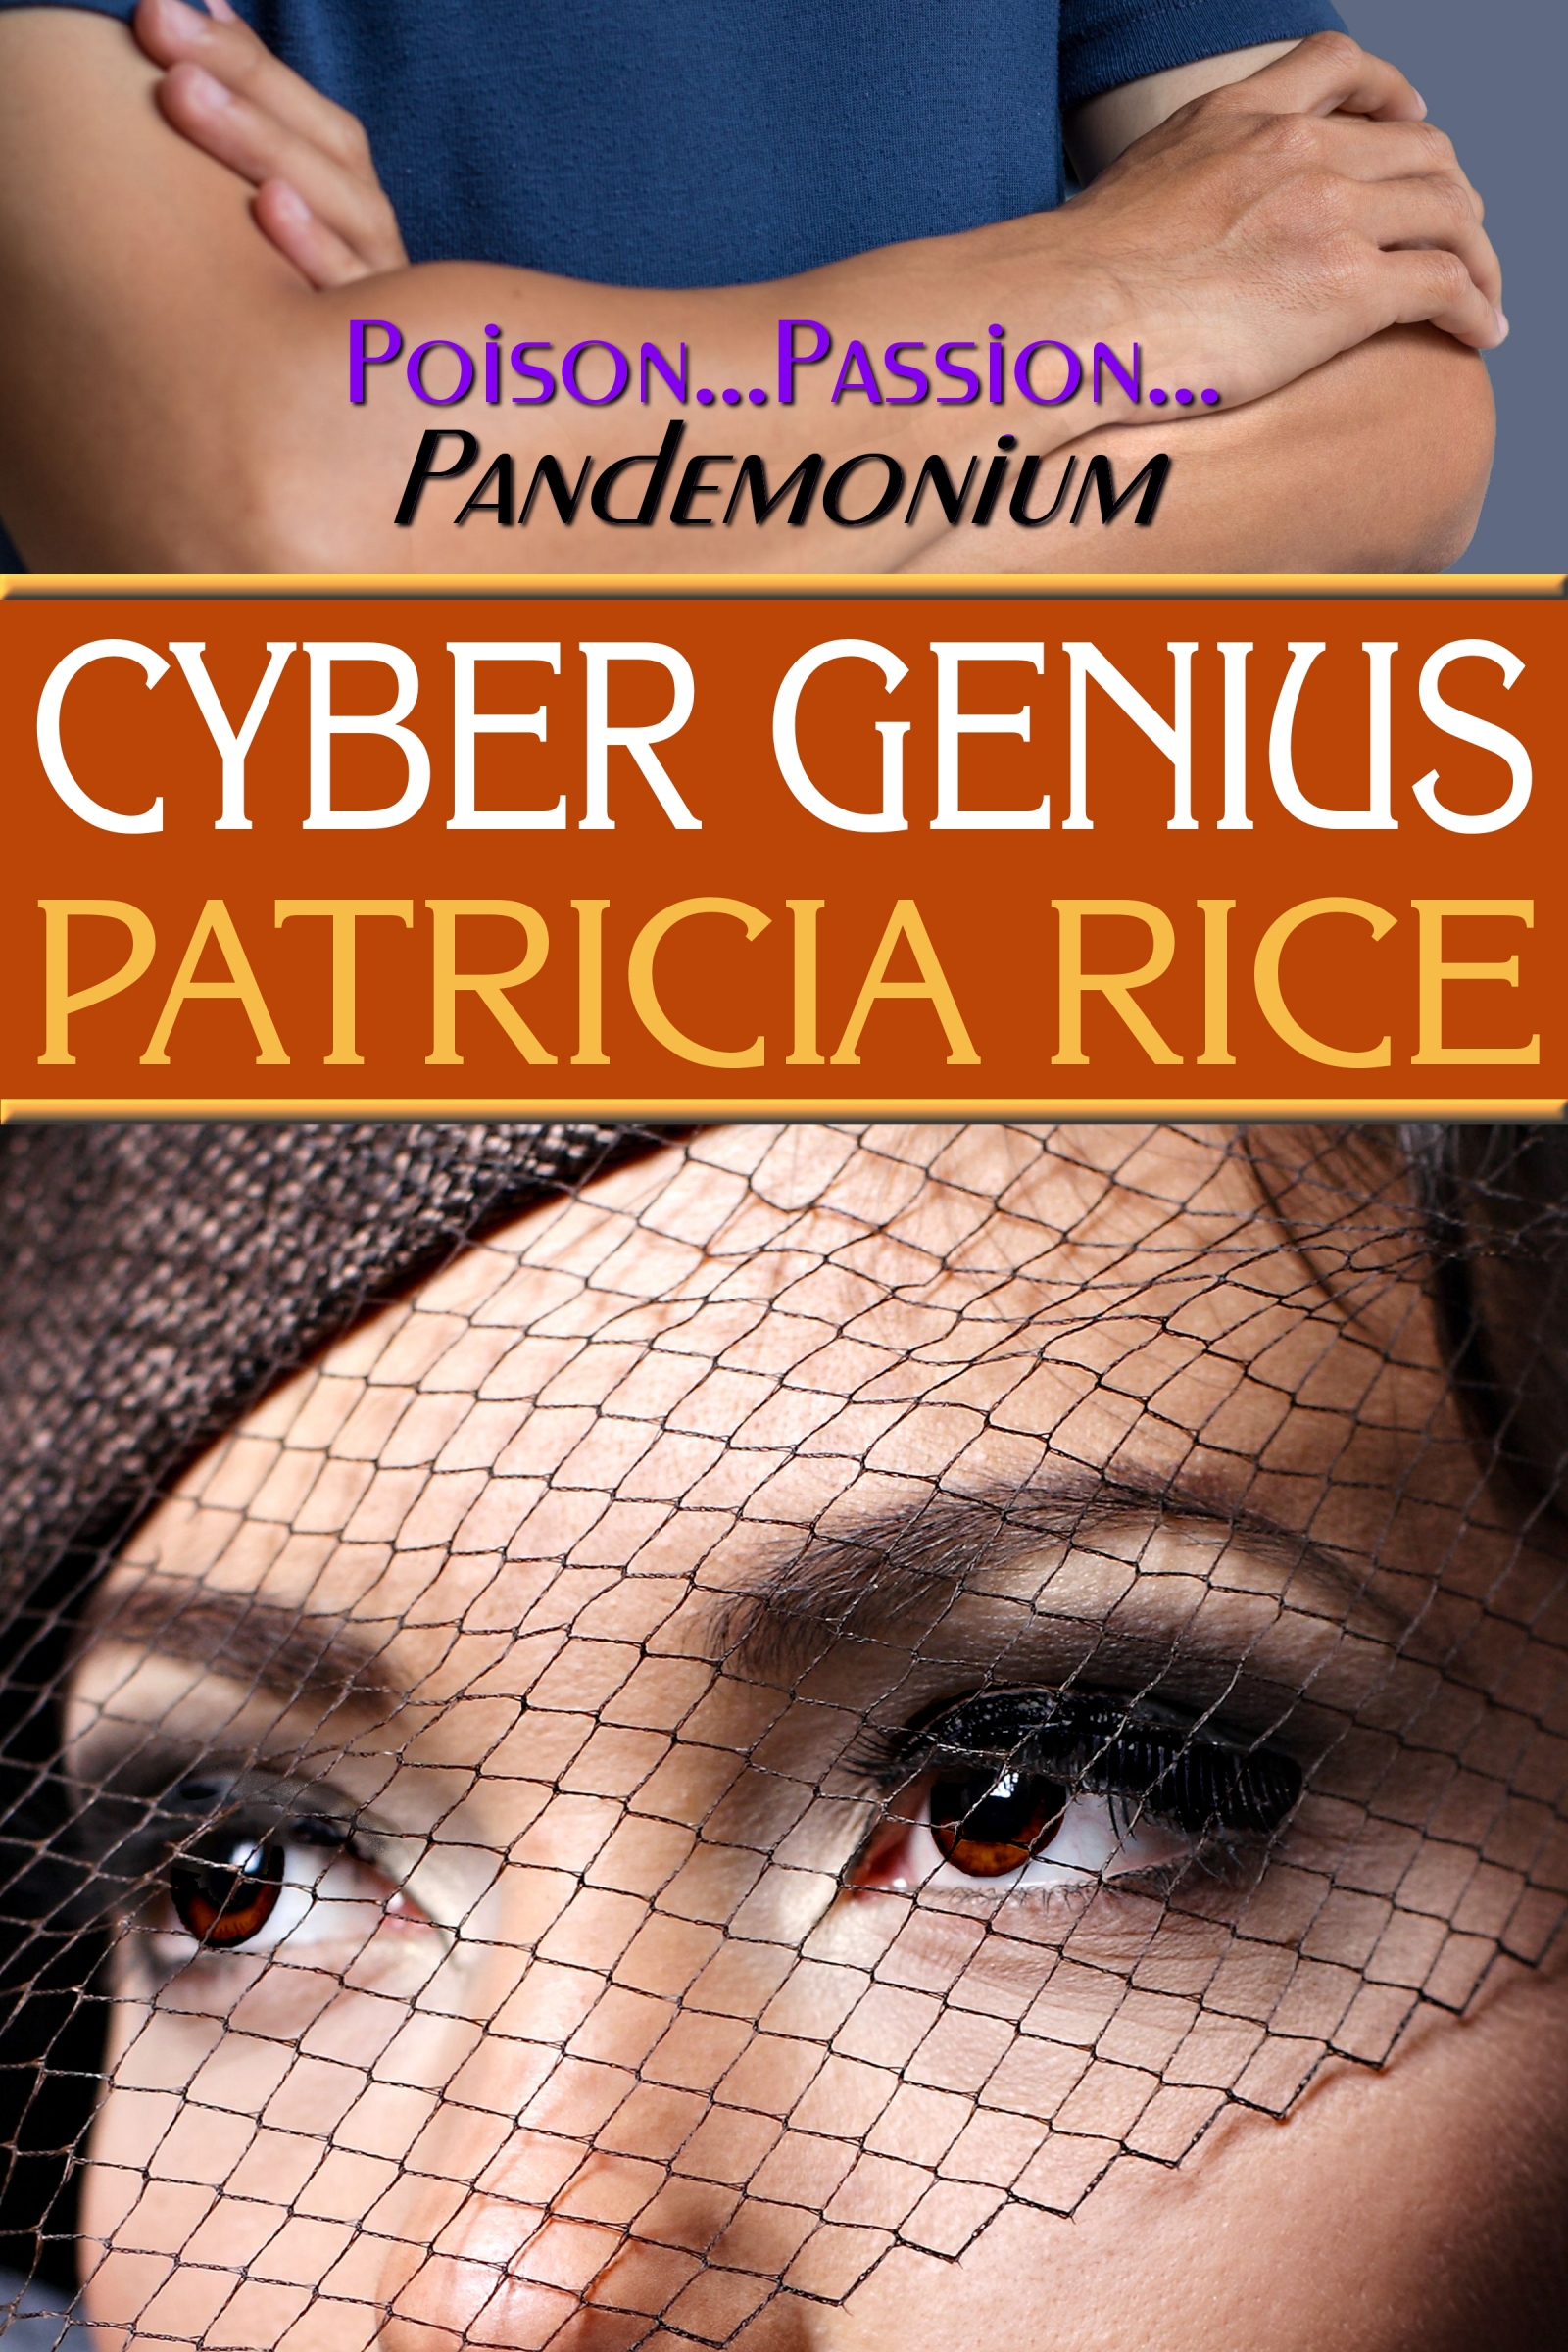 Cyber Genius by Patricia Rice